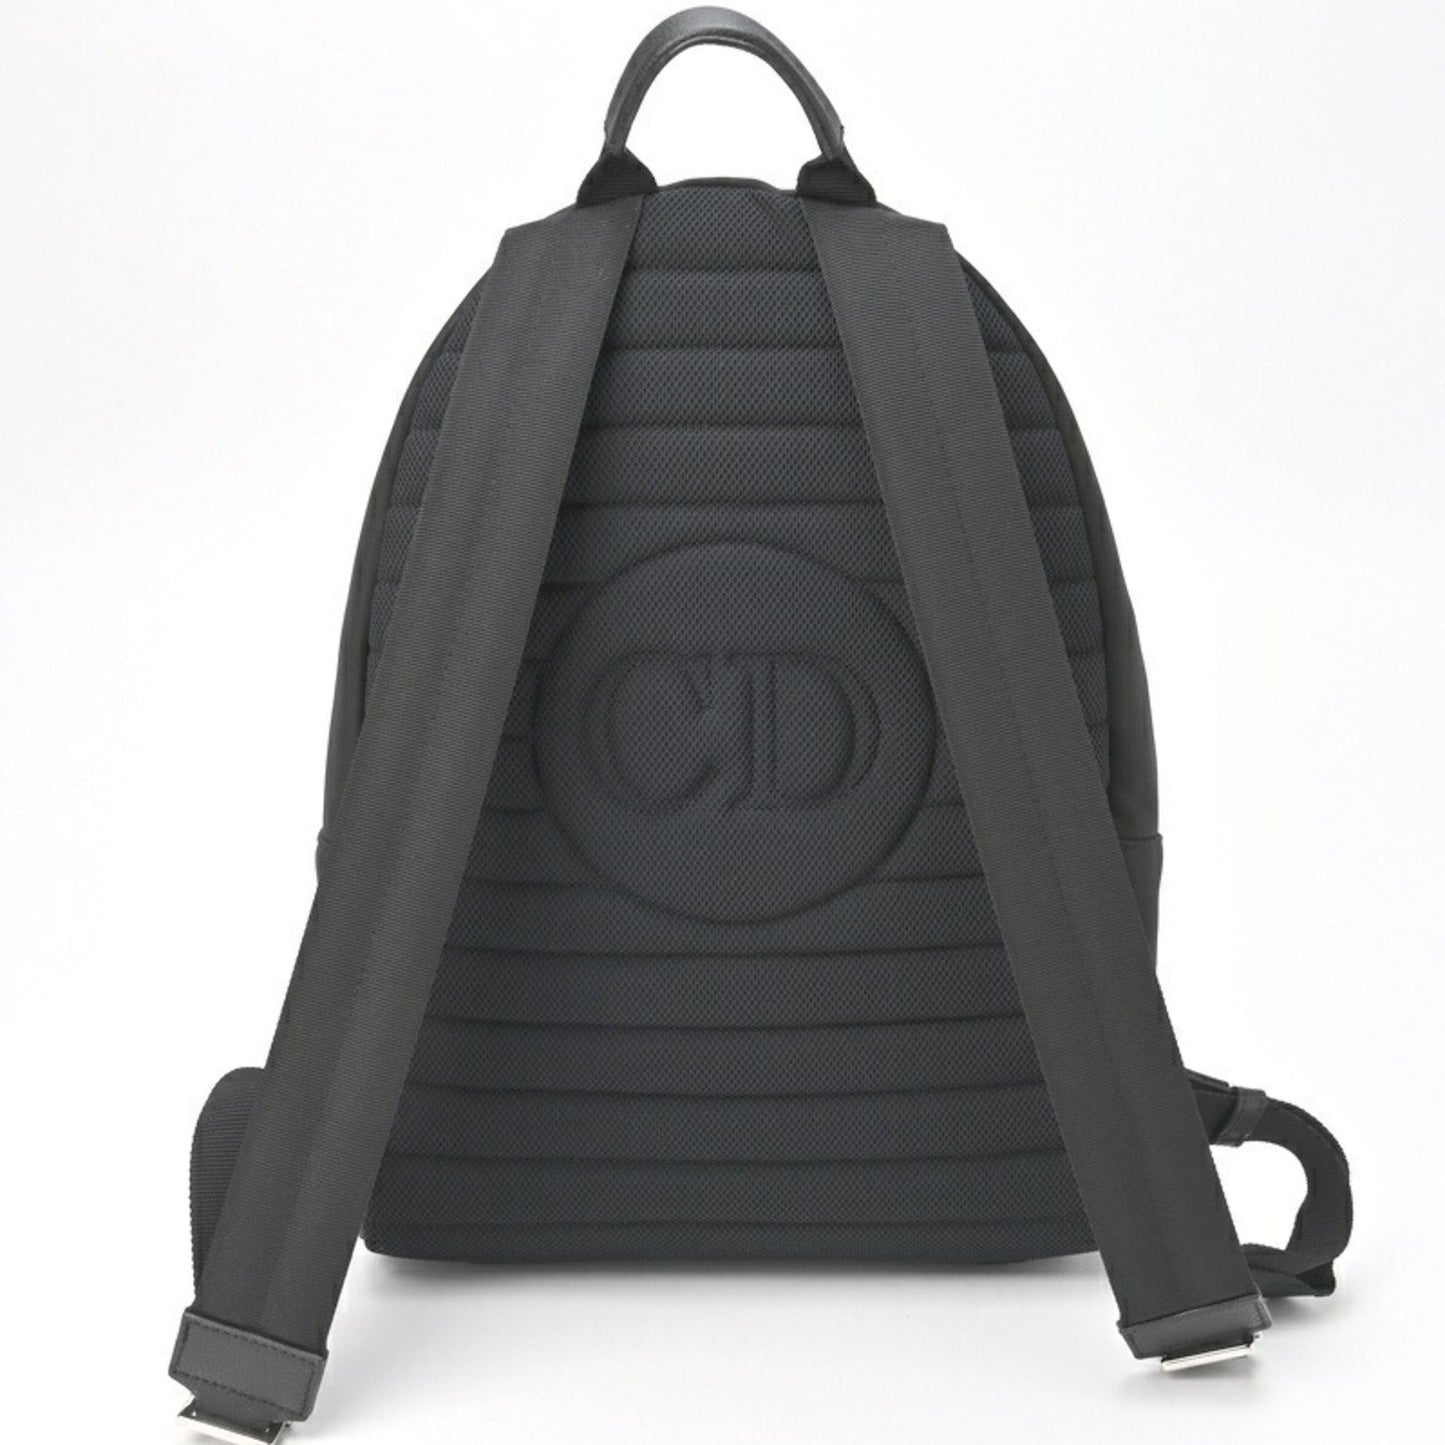 Dior Unisex Luxury Black Nylon and Leather Backpack in Black